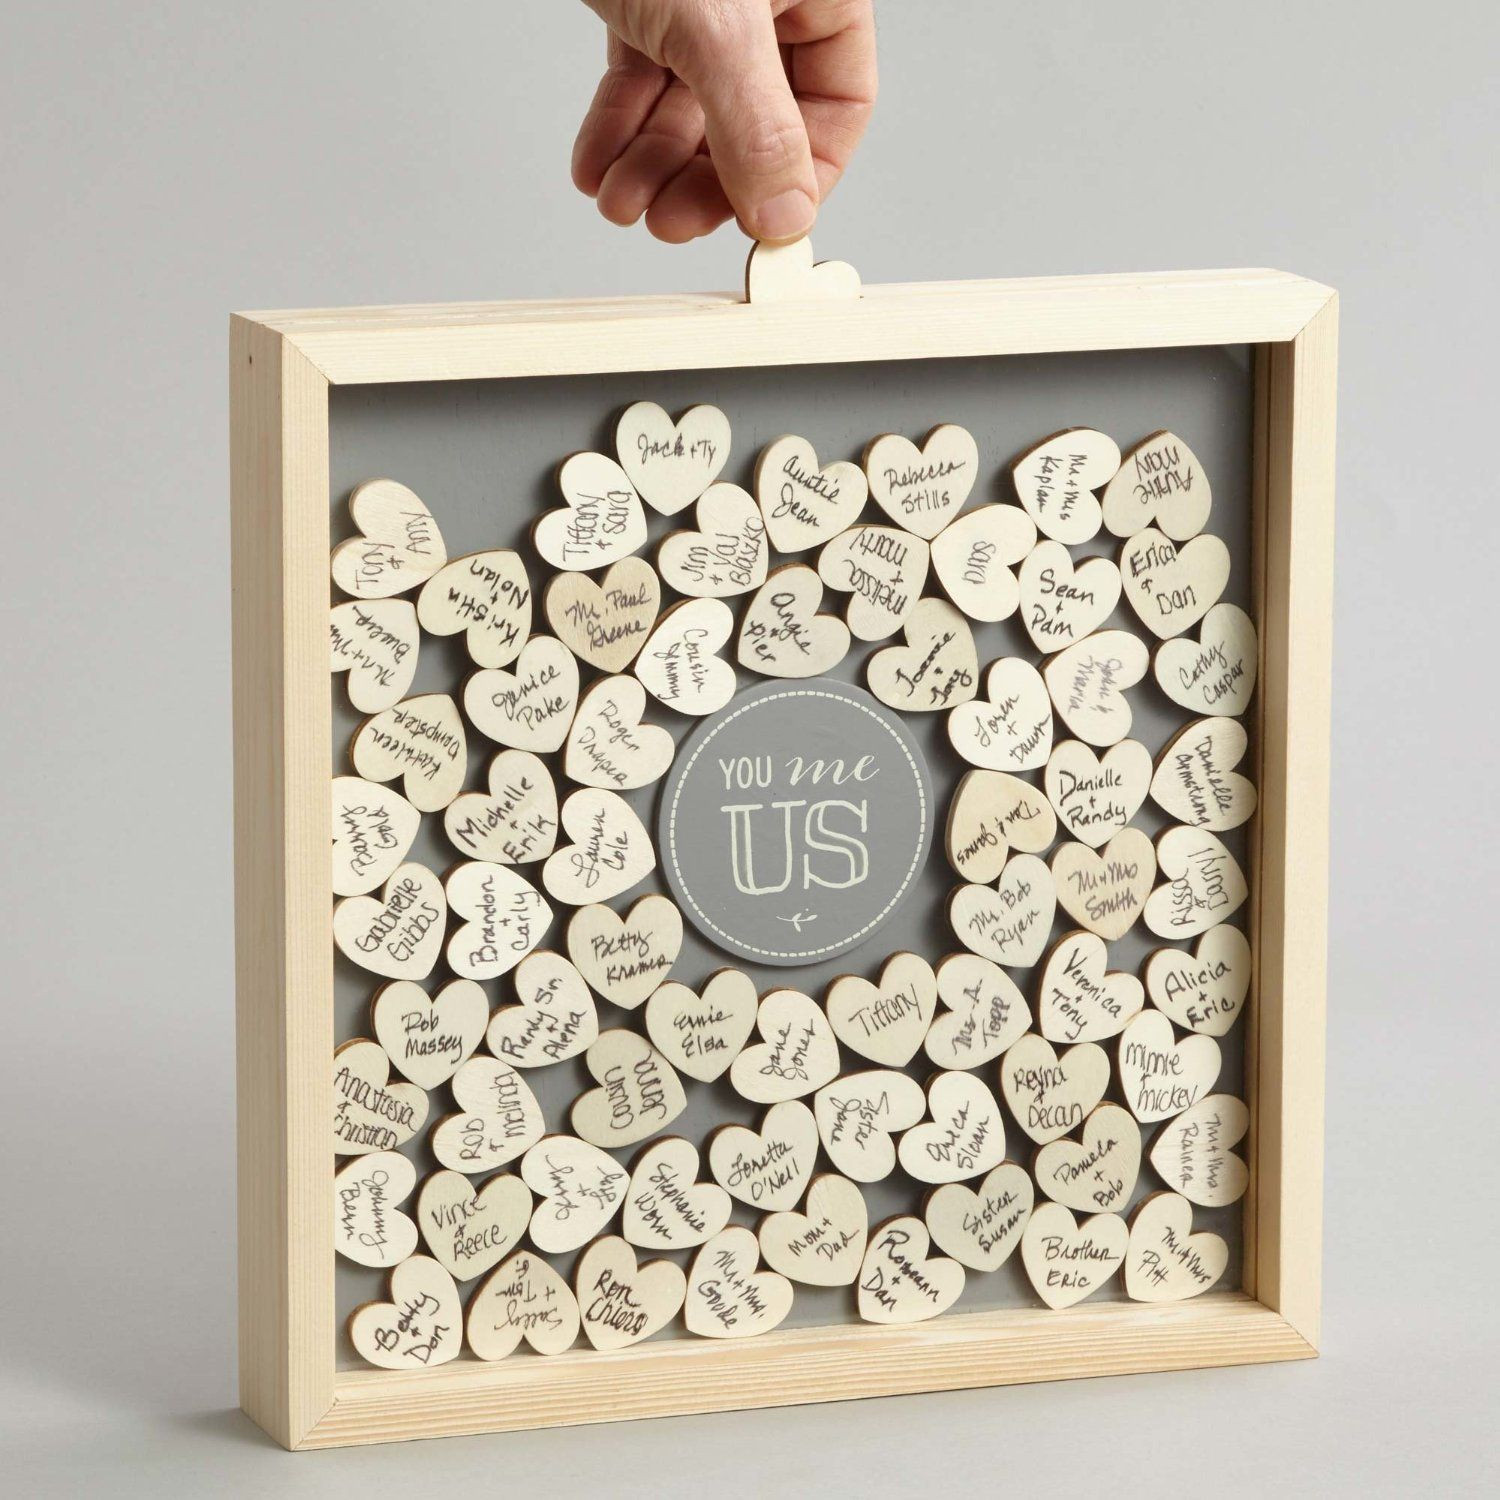 Shadow Box Guest Book DIY
 This You Me Us Guest Book Shadow Box is so much more fun